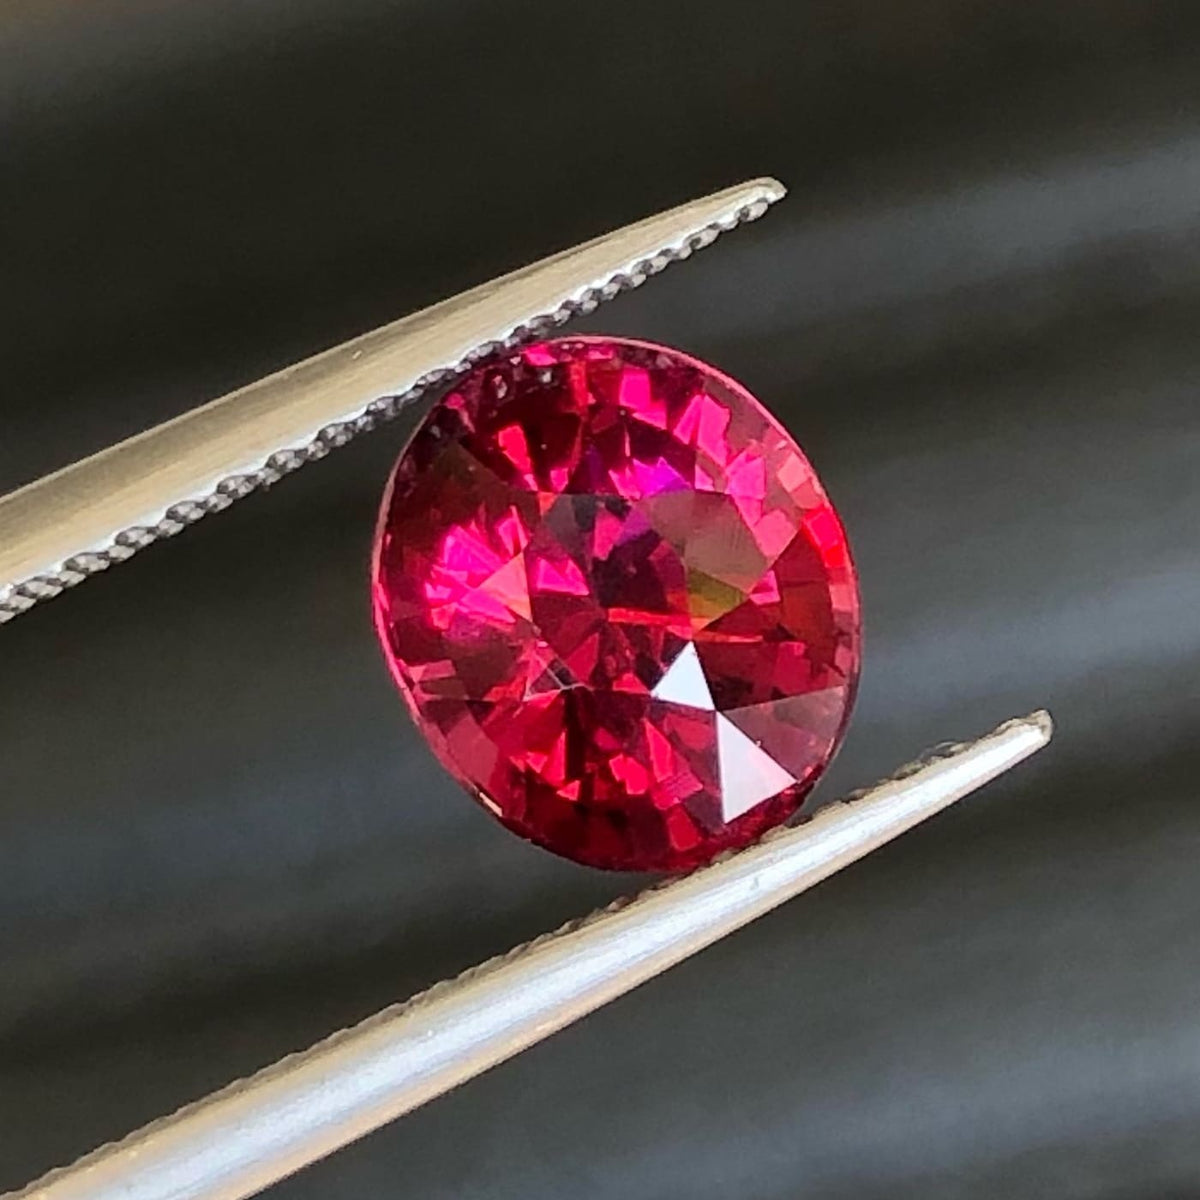 Faceted Pinkish Red Garnet